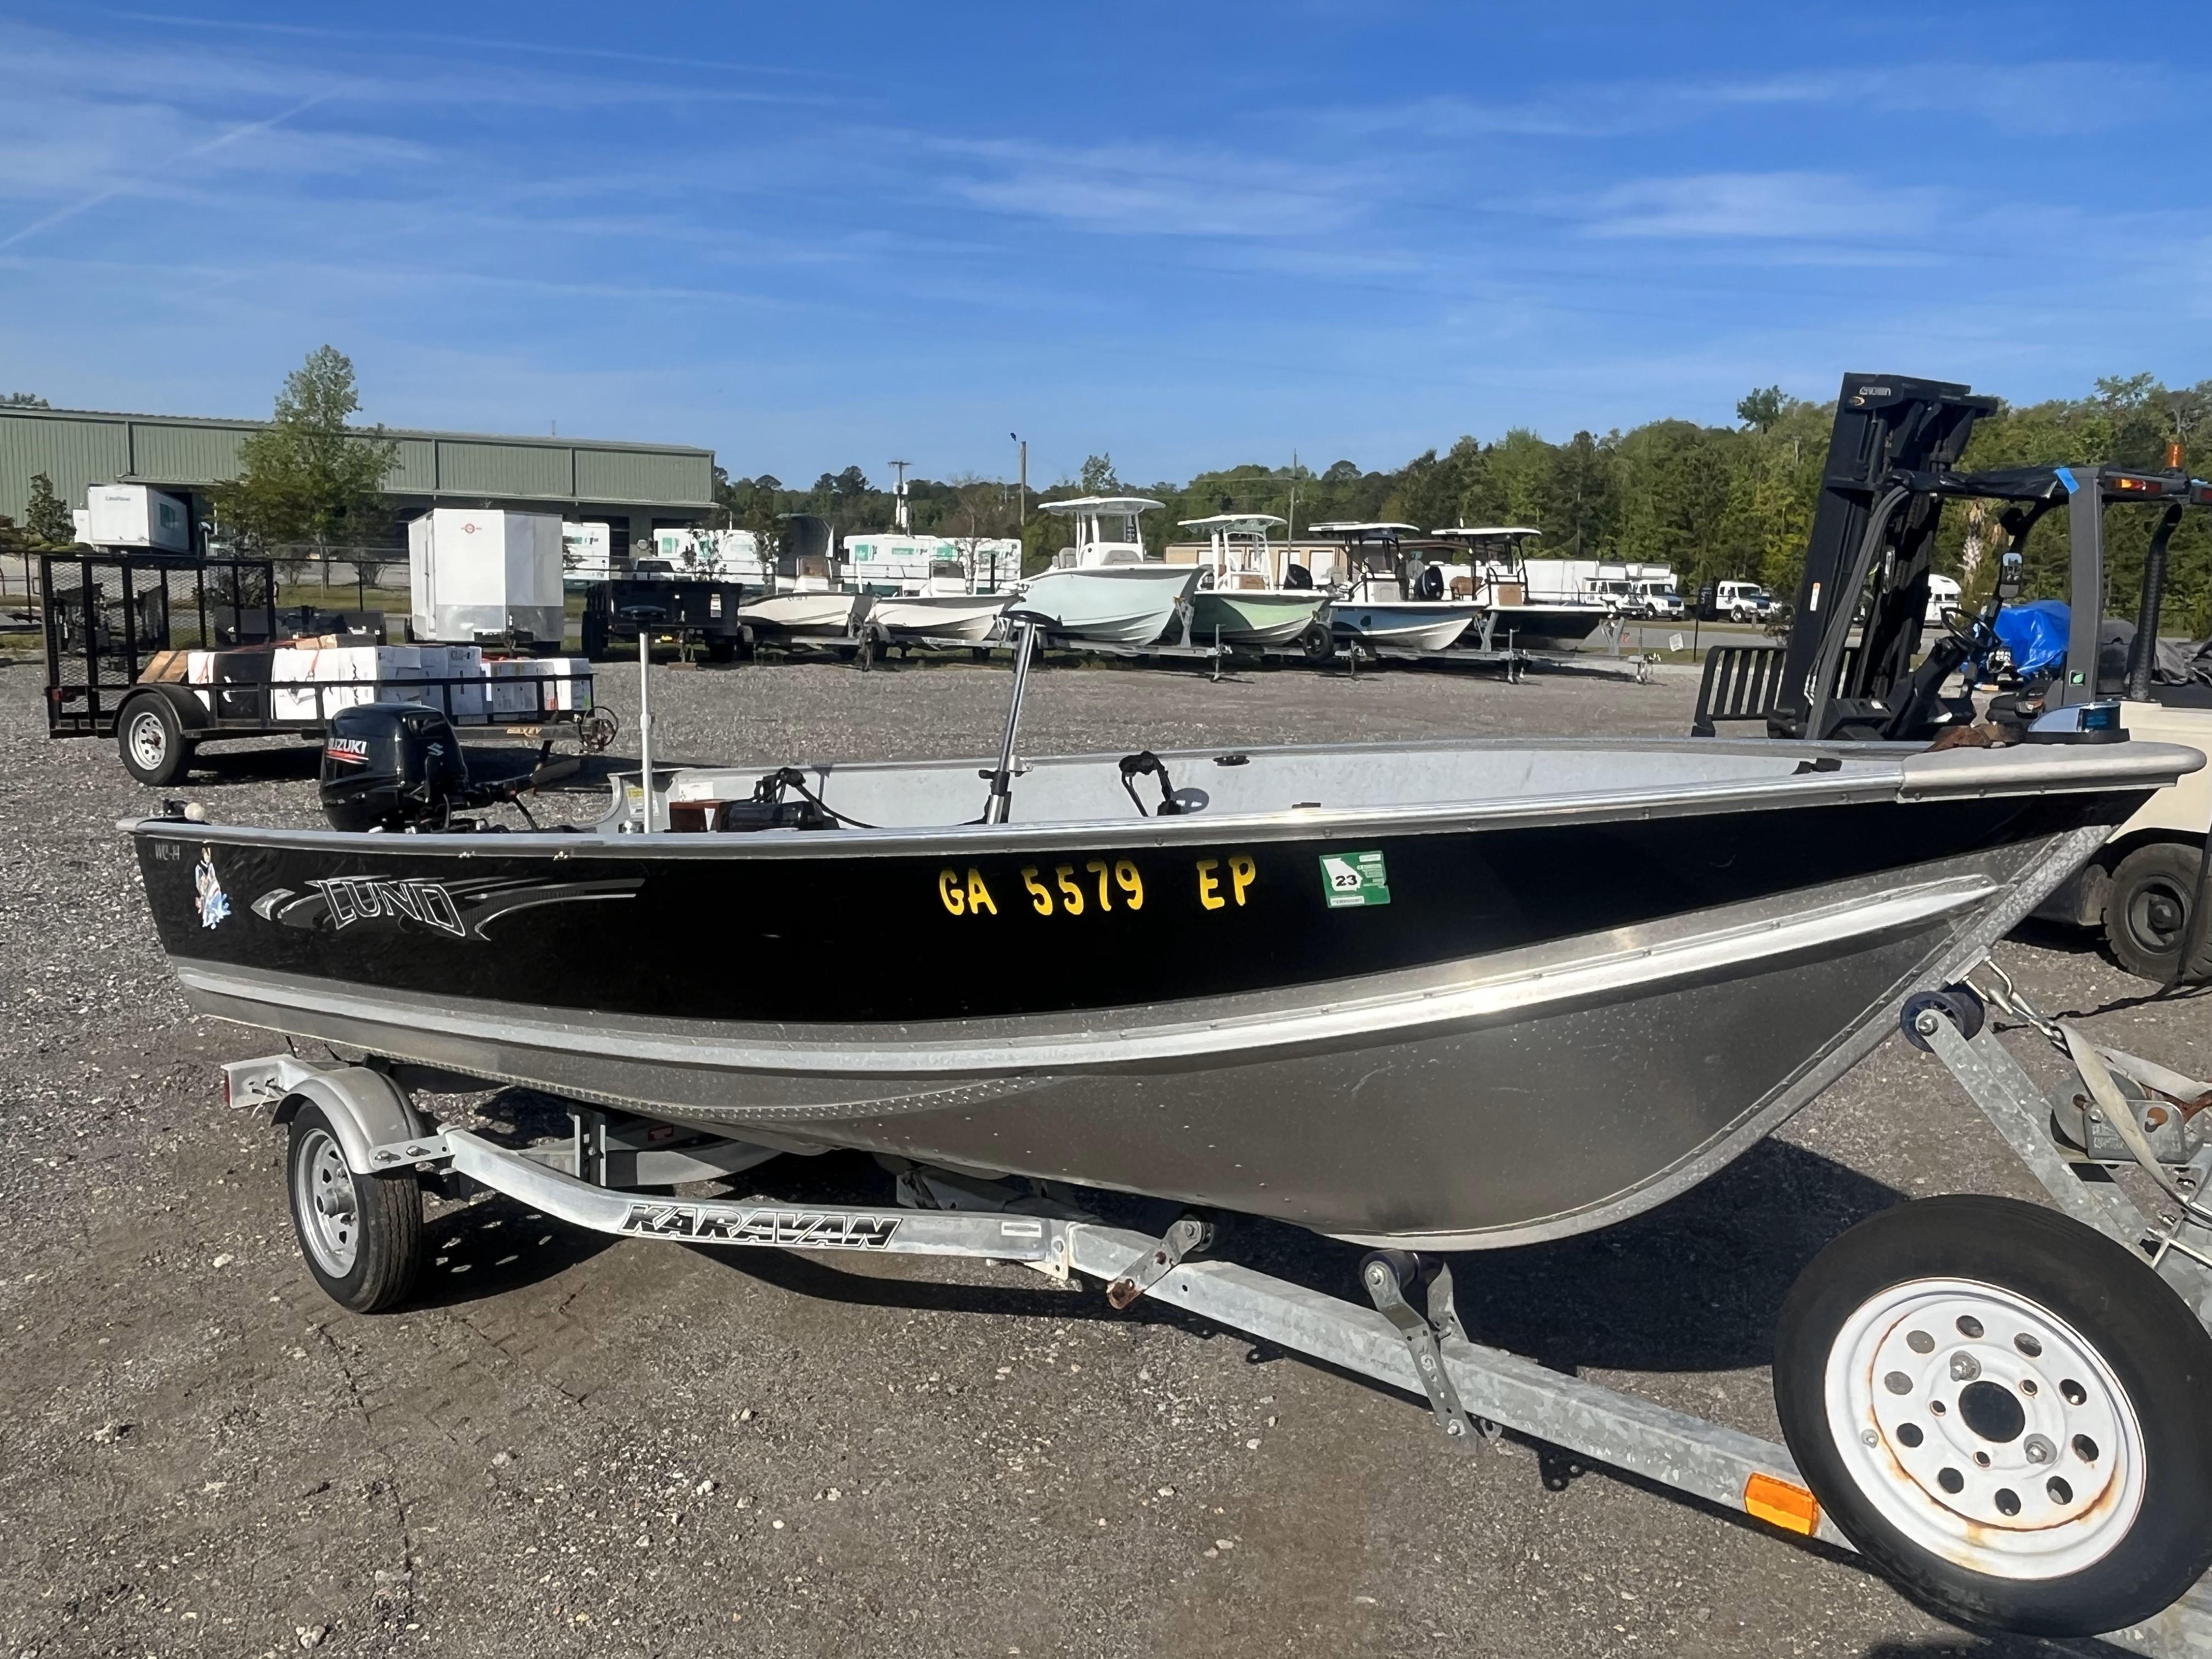 Freshwater Fishing boats for sale in Georgia - Boat Trader